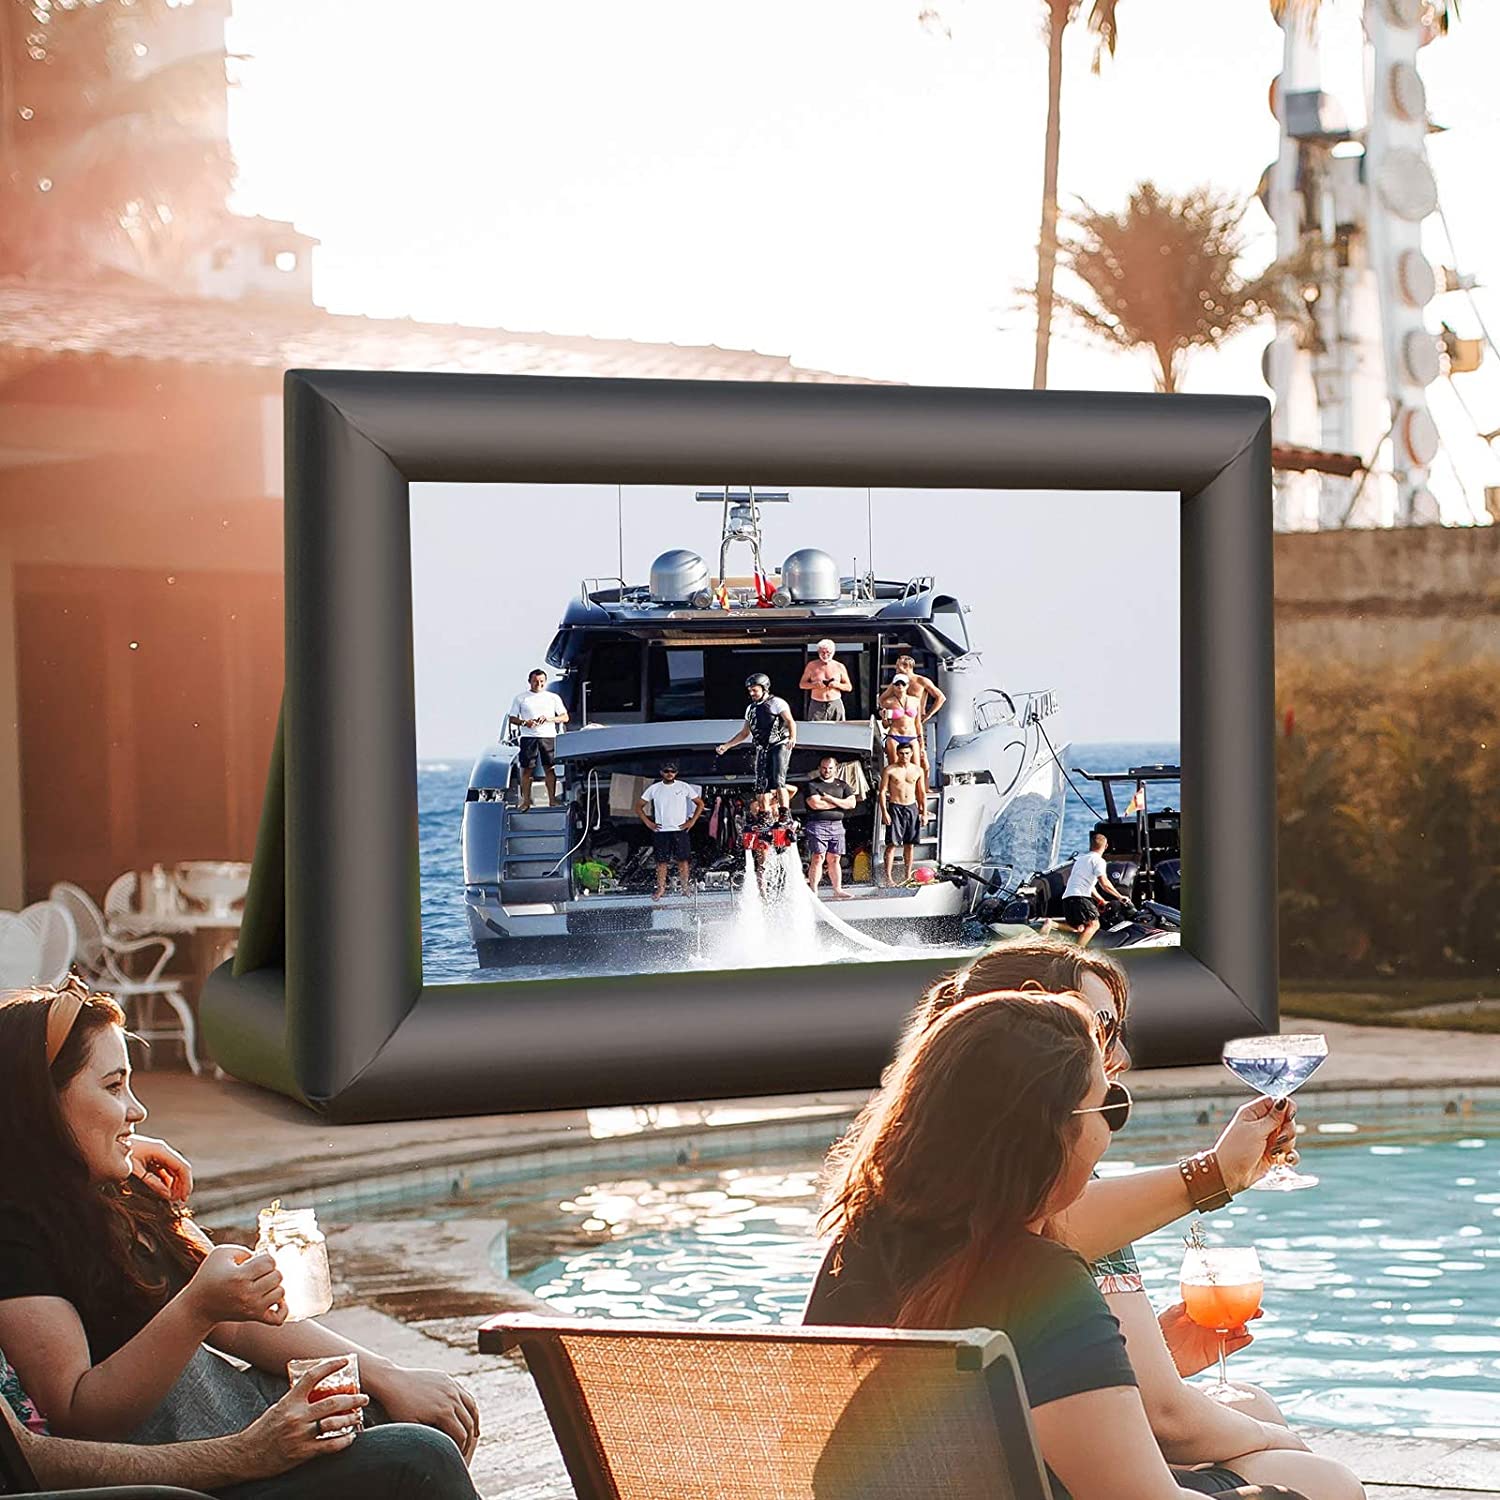 SUNCOO 17ft Outdoor Movie Projector Screen,Front/Rear Inflatable Projection Screen with Blower Strings Stakes & Storage Bag for Backyard Movie Parties Pool Lawn Event, Inflatable Movie Screen(17FT)